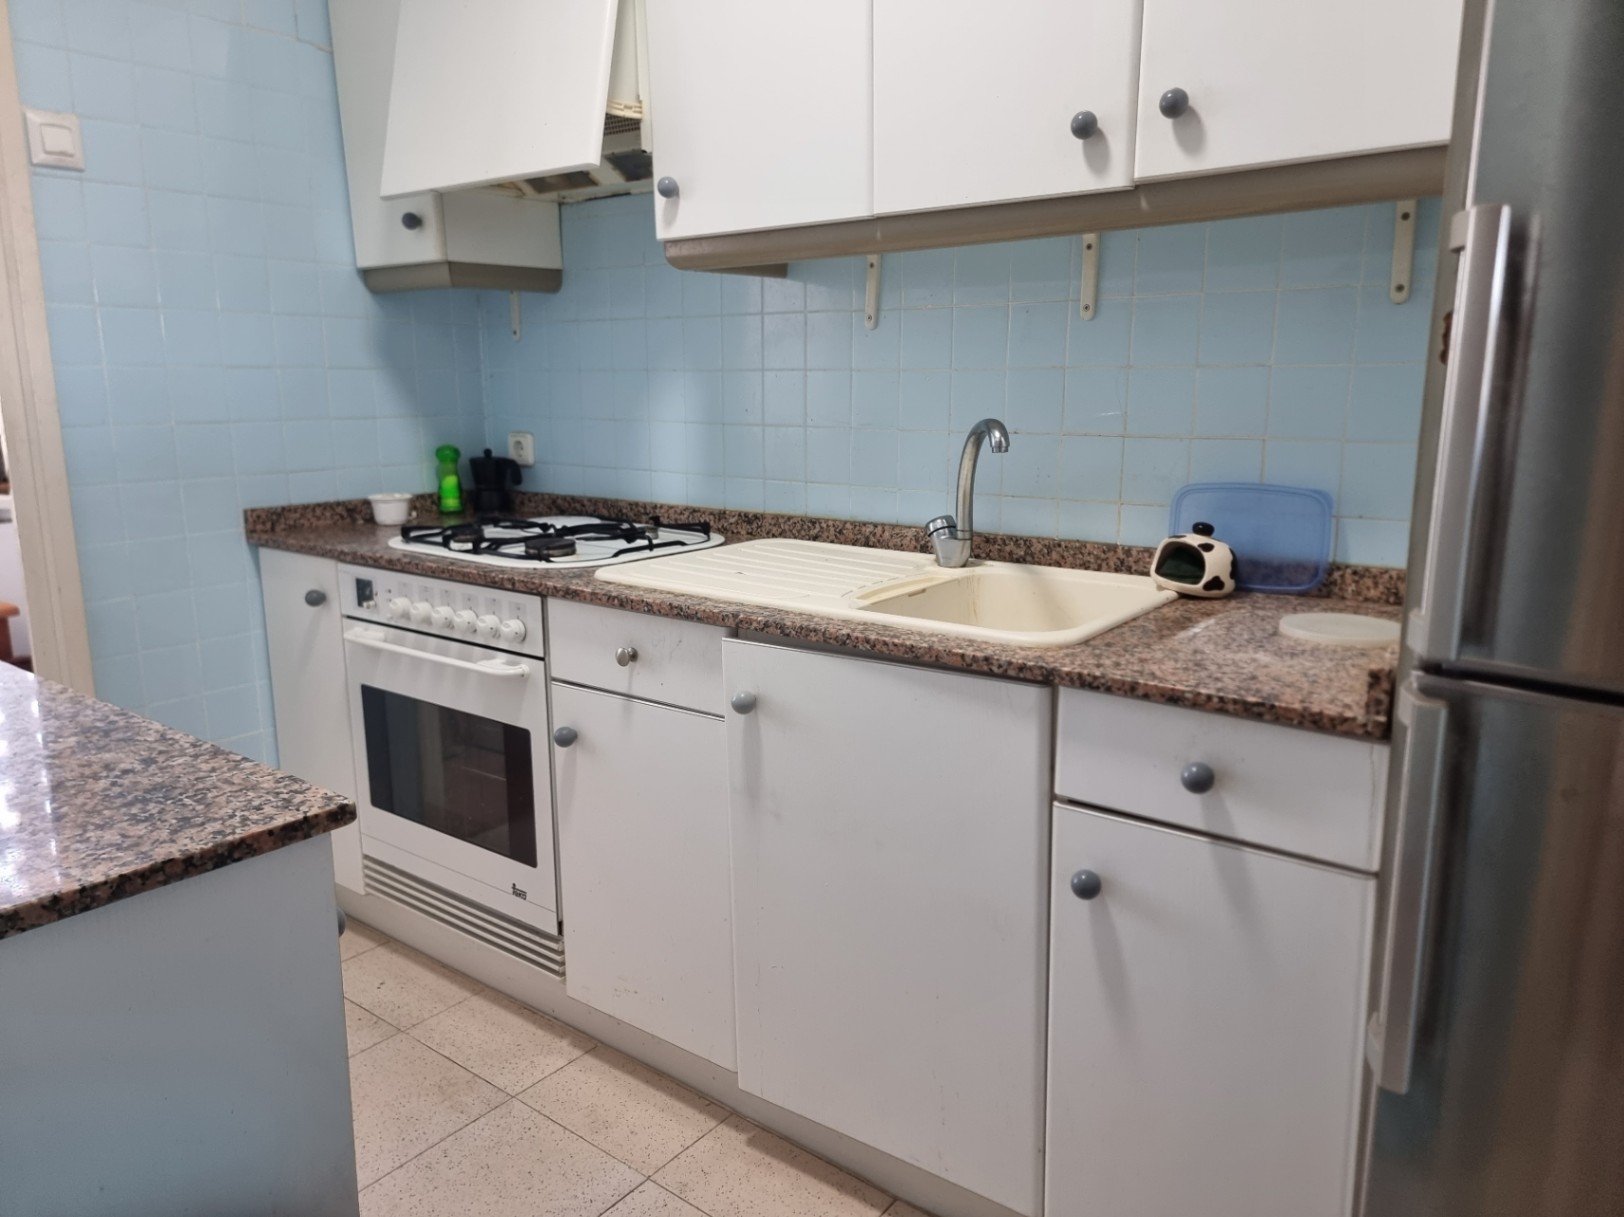 Apartment for sale in Dénia